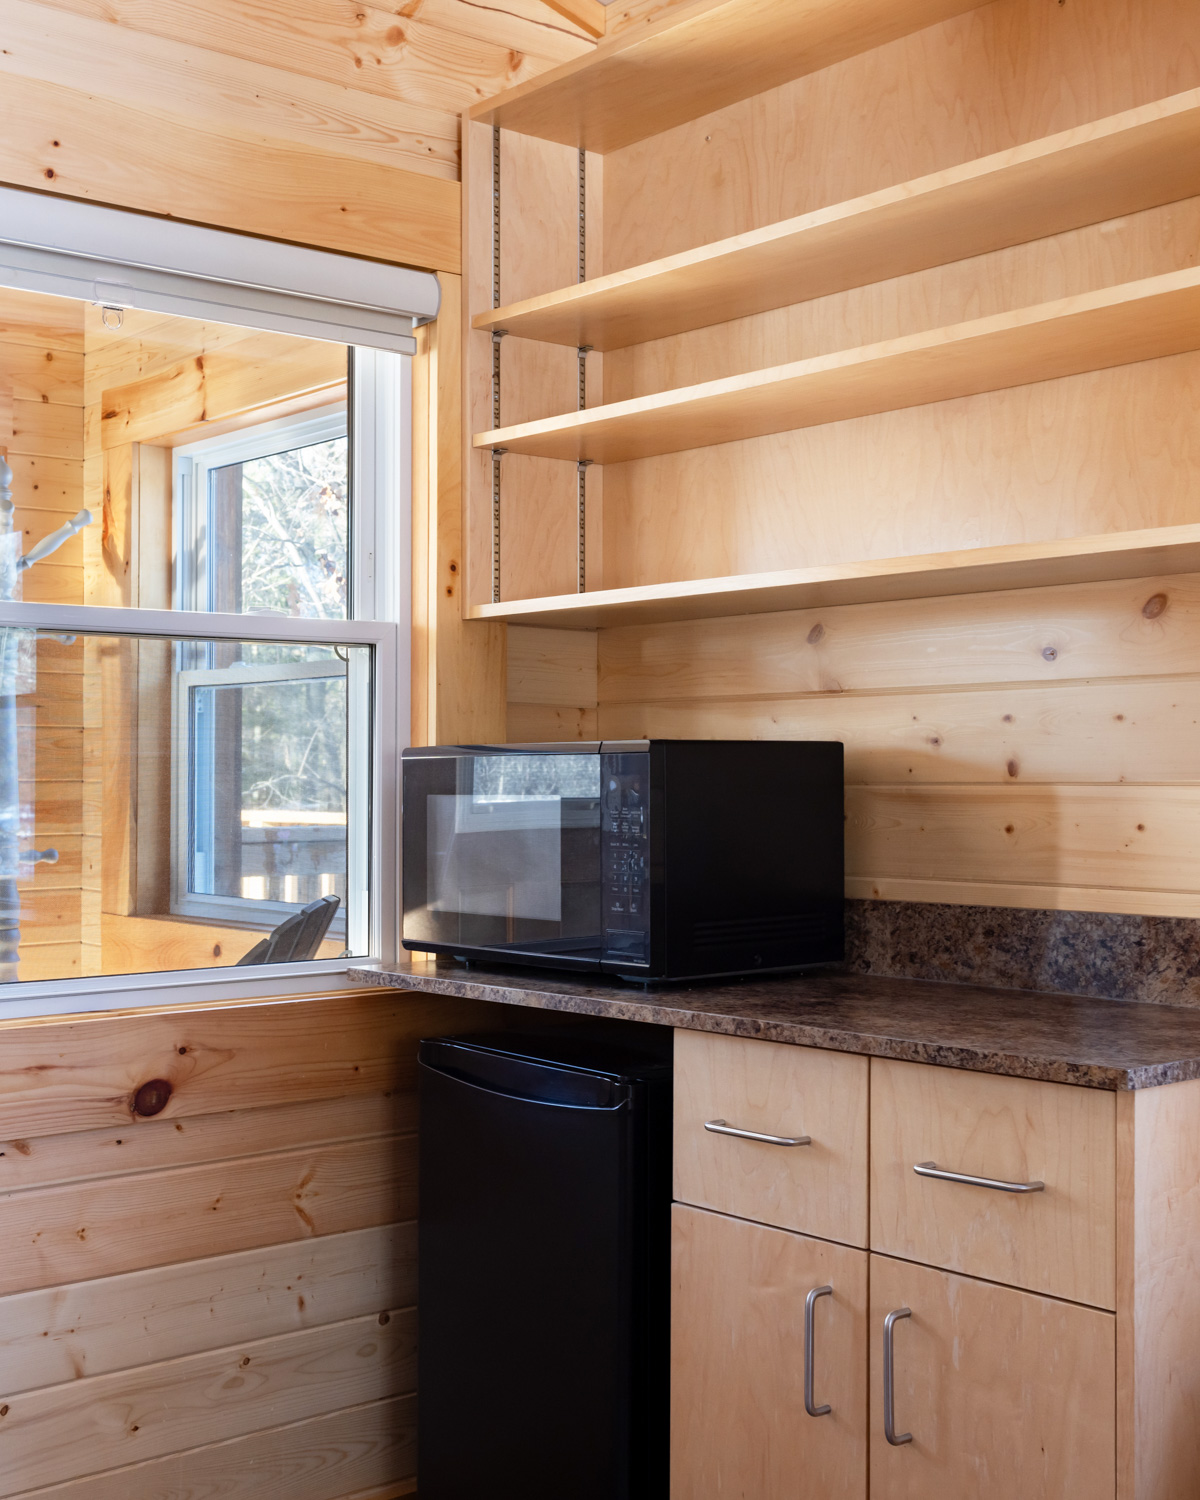 The cabin kitchenette with microwave and mini fridge.